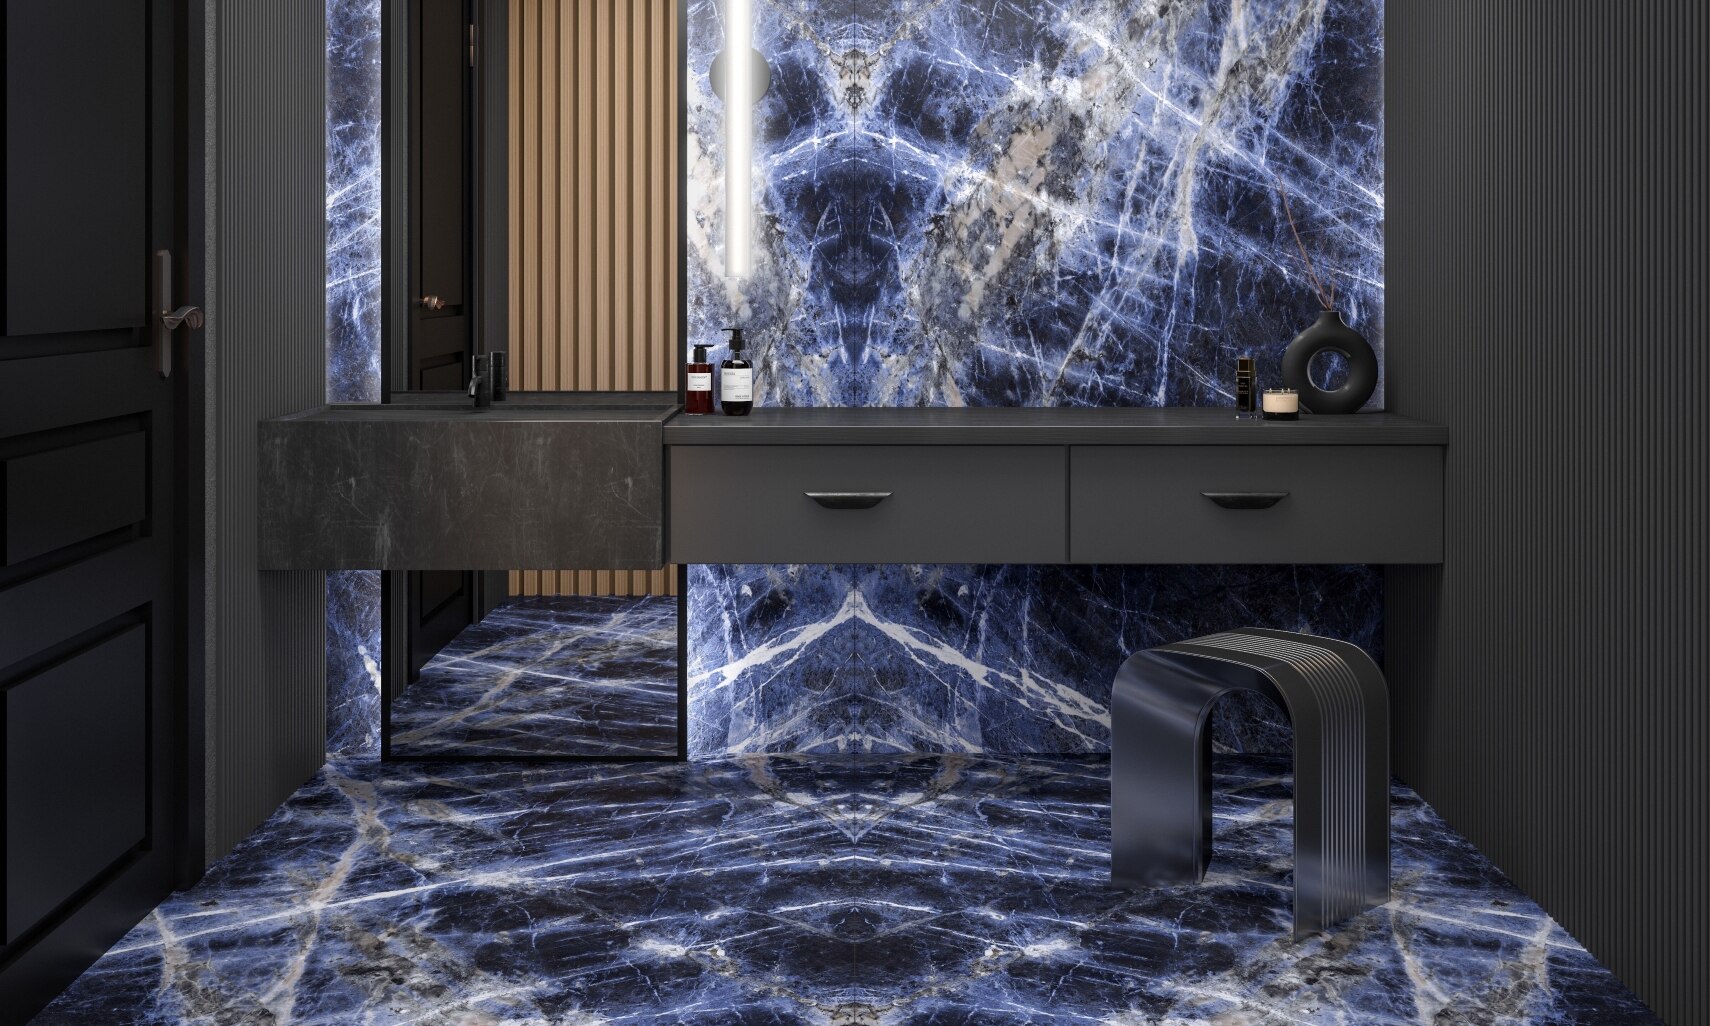 Bathroom featuring wall and flooring of large formal porcelain slab with dark blue and white veining that looks like marble, floor-to-ceiling mirror, and dark grey floating vanity.